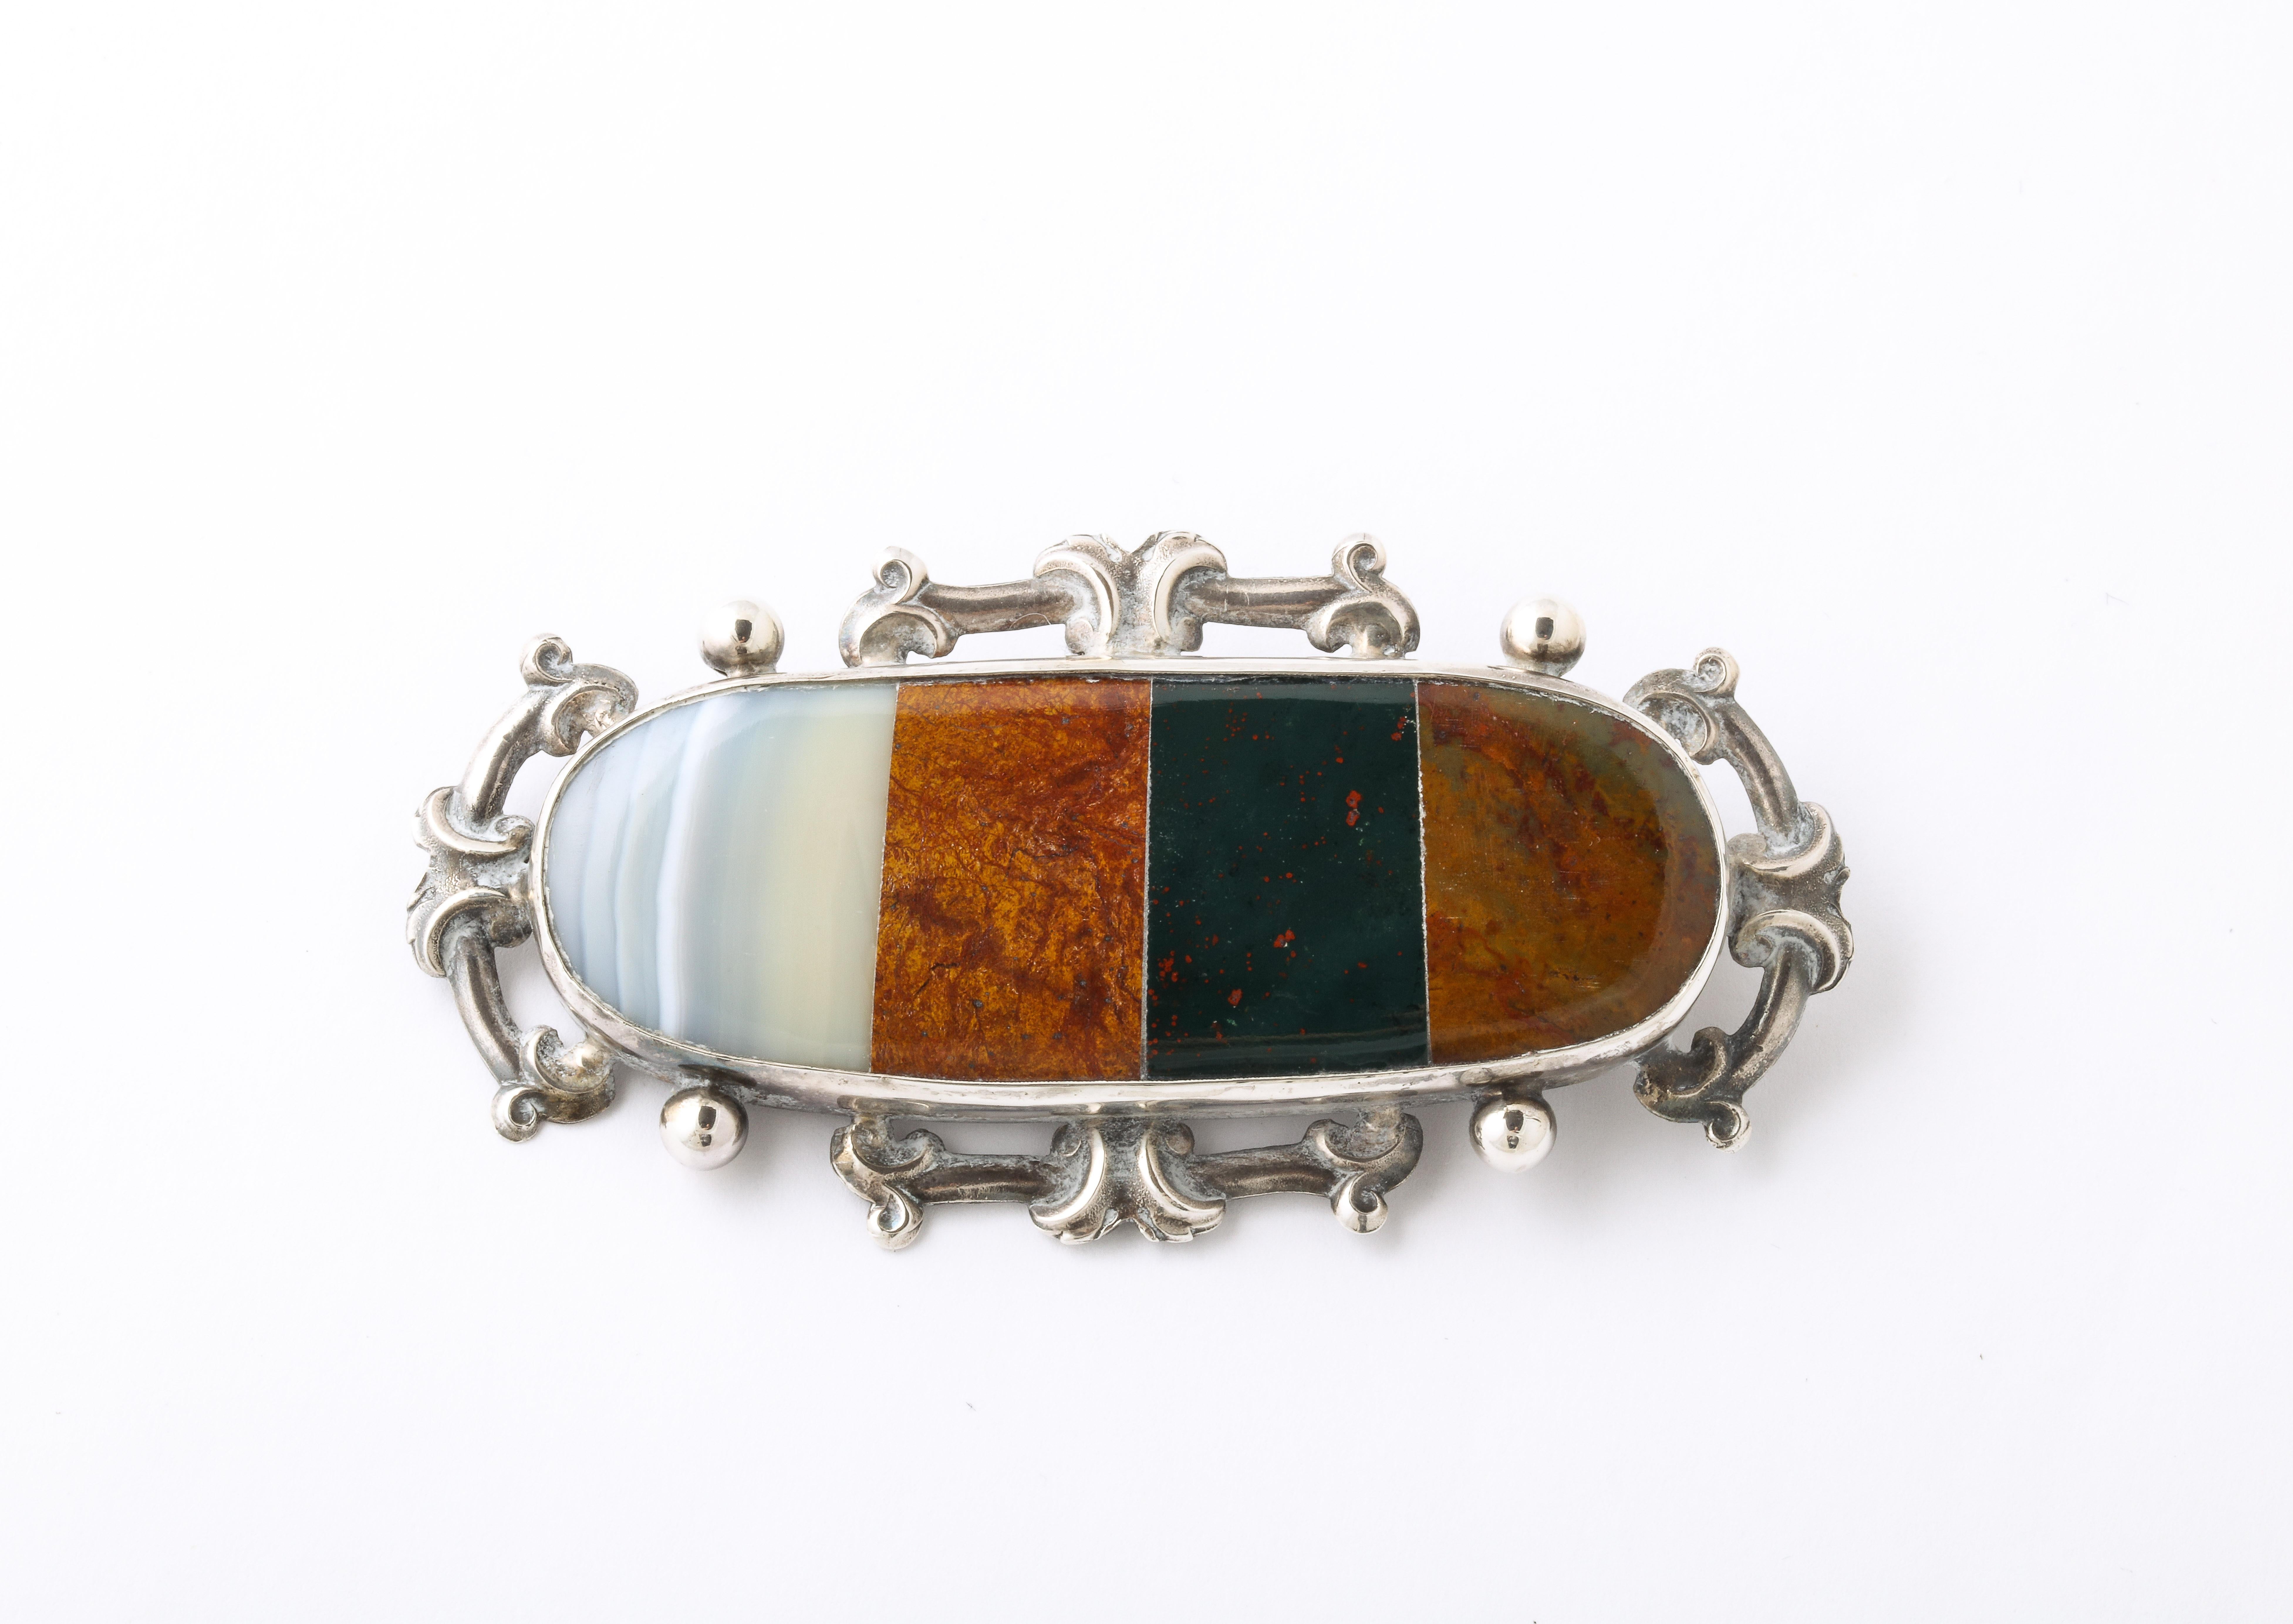 Set in Sterling, this substantial Scottish brooch is set with four colors of agate native to Scotland. Fine Scottish jewelry makers mastered the stone setting so that is was seamless. You can run your finger across the brooch and feel no divisions